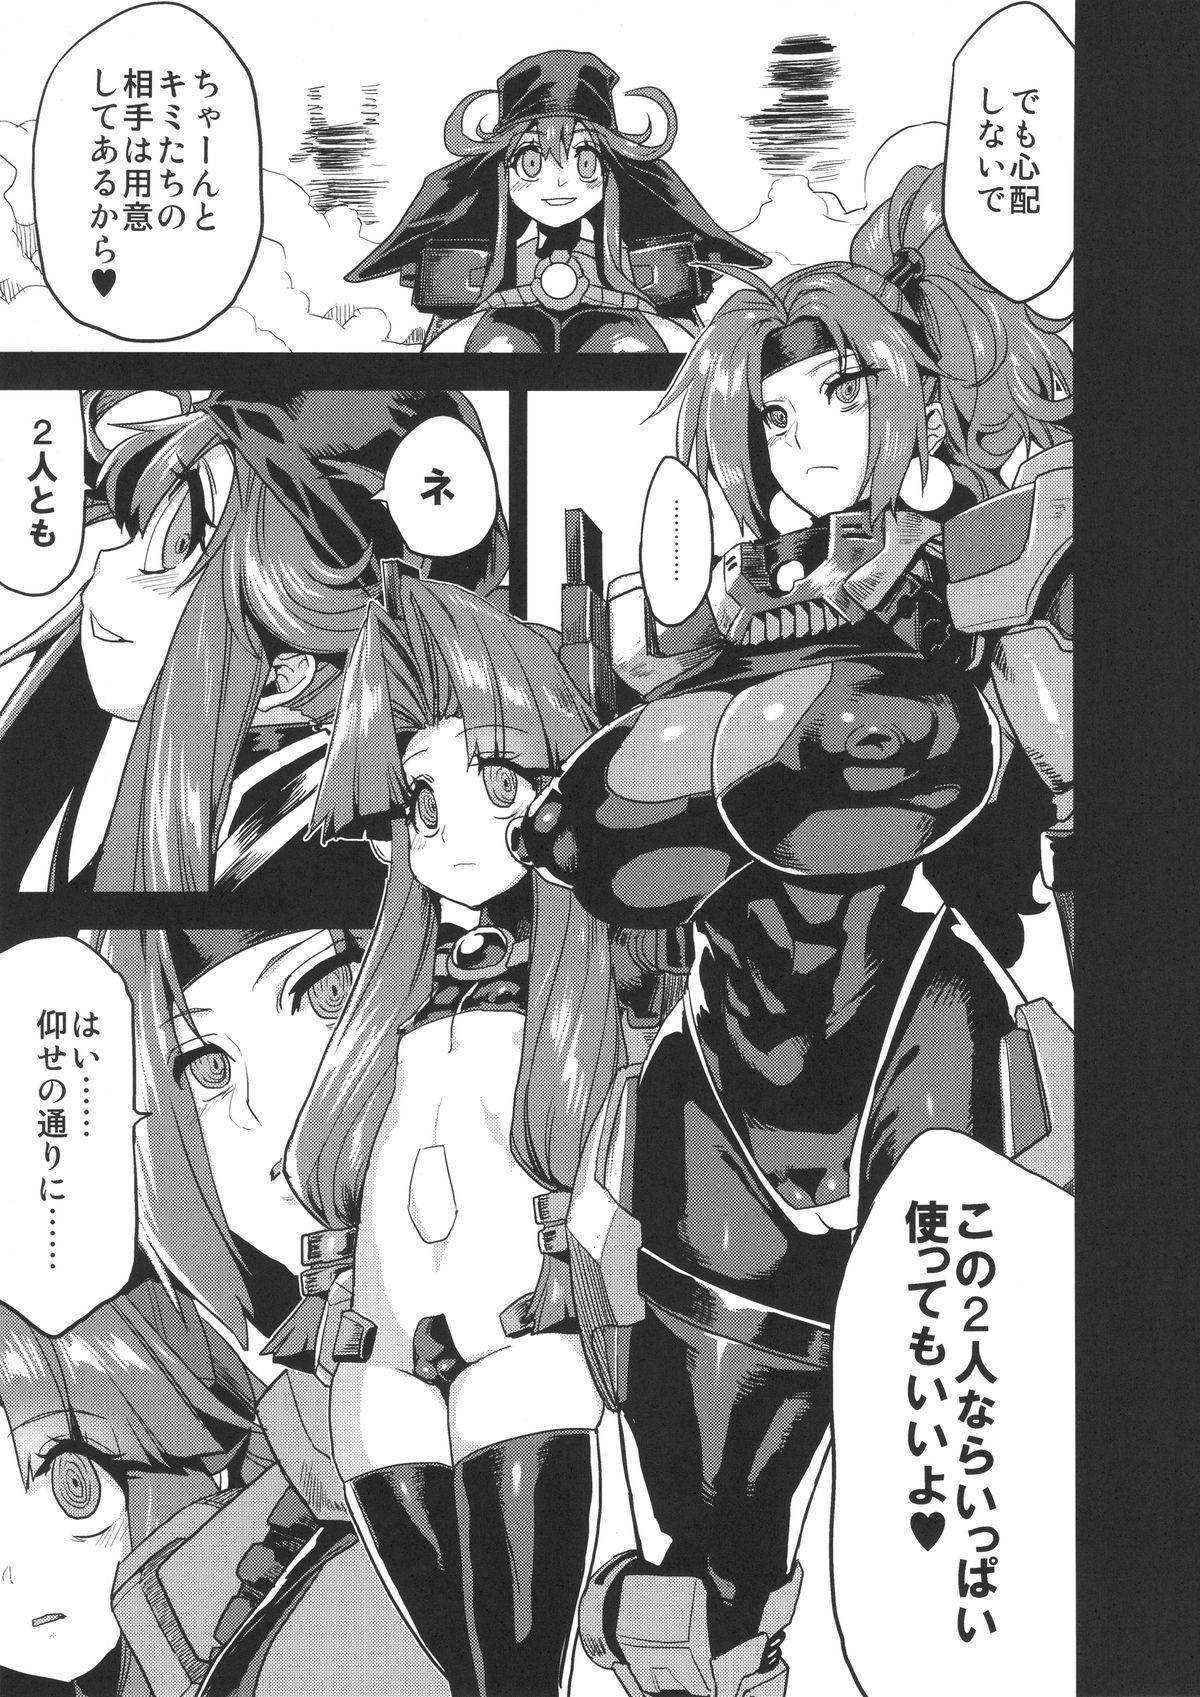 Fat Ass Hentai Marionette 4 - Saber marionette Gay Friend - Page 6